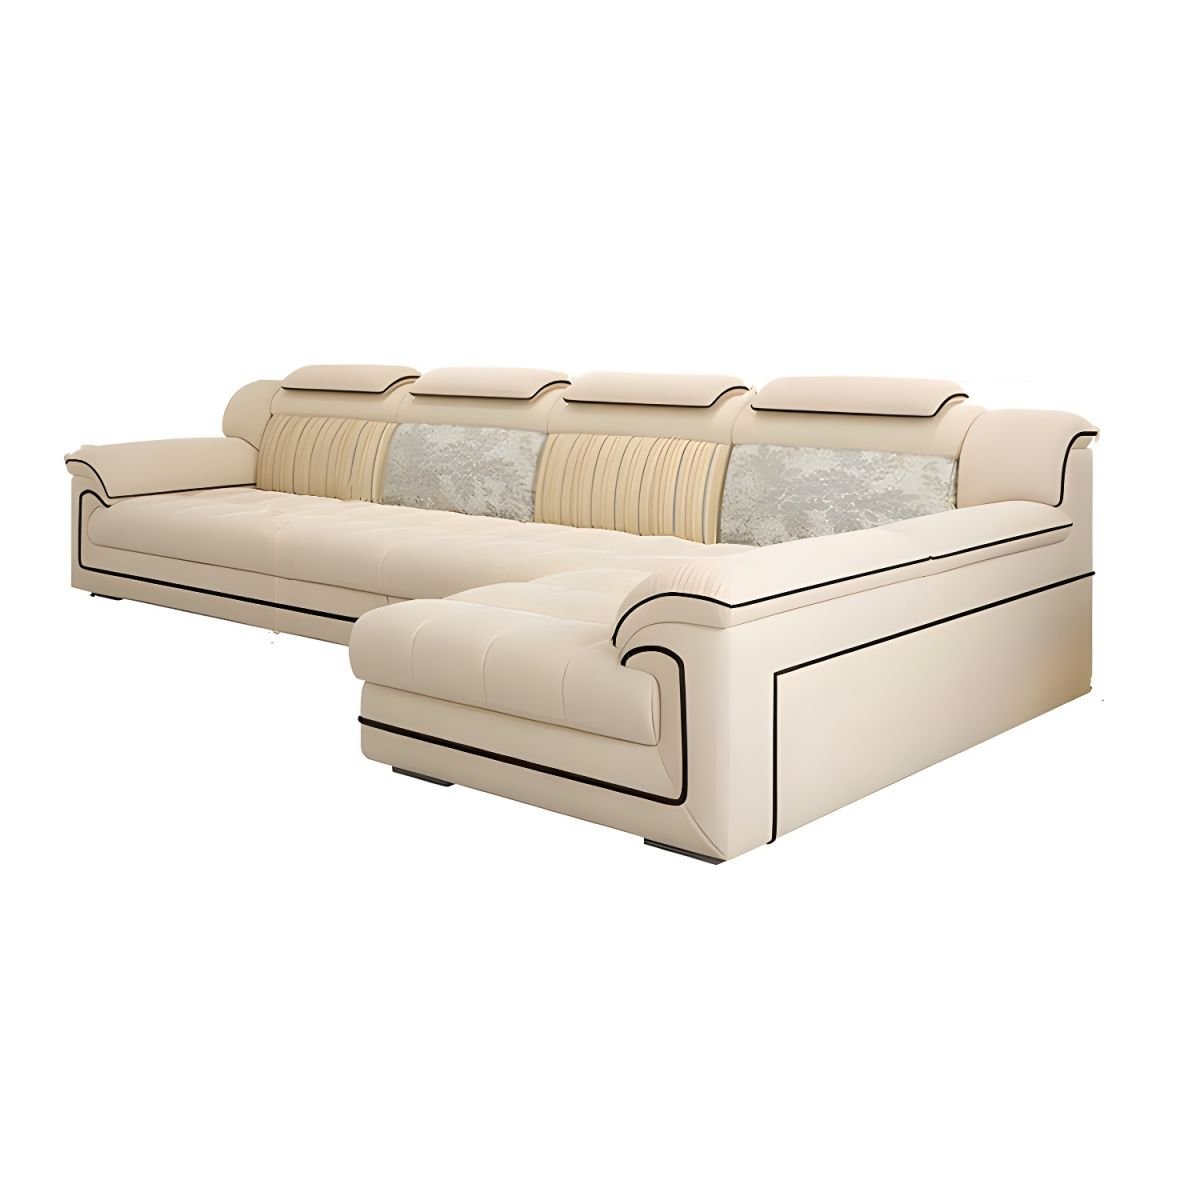 Contemporary L-Shaped Sofa & Chaise in Off-White with Pillow Top Arm - 141"L x 69"W x 40.5"H Flannel